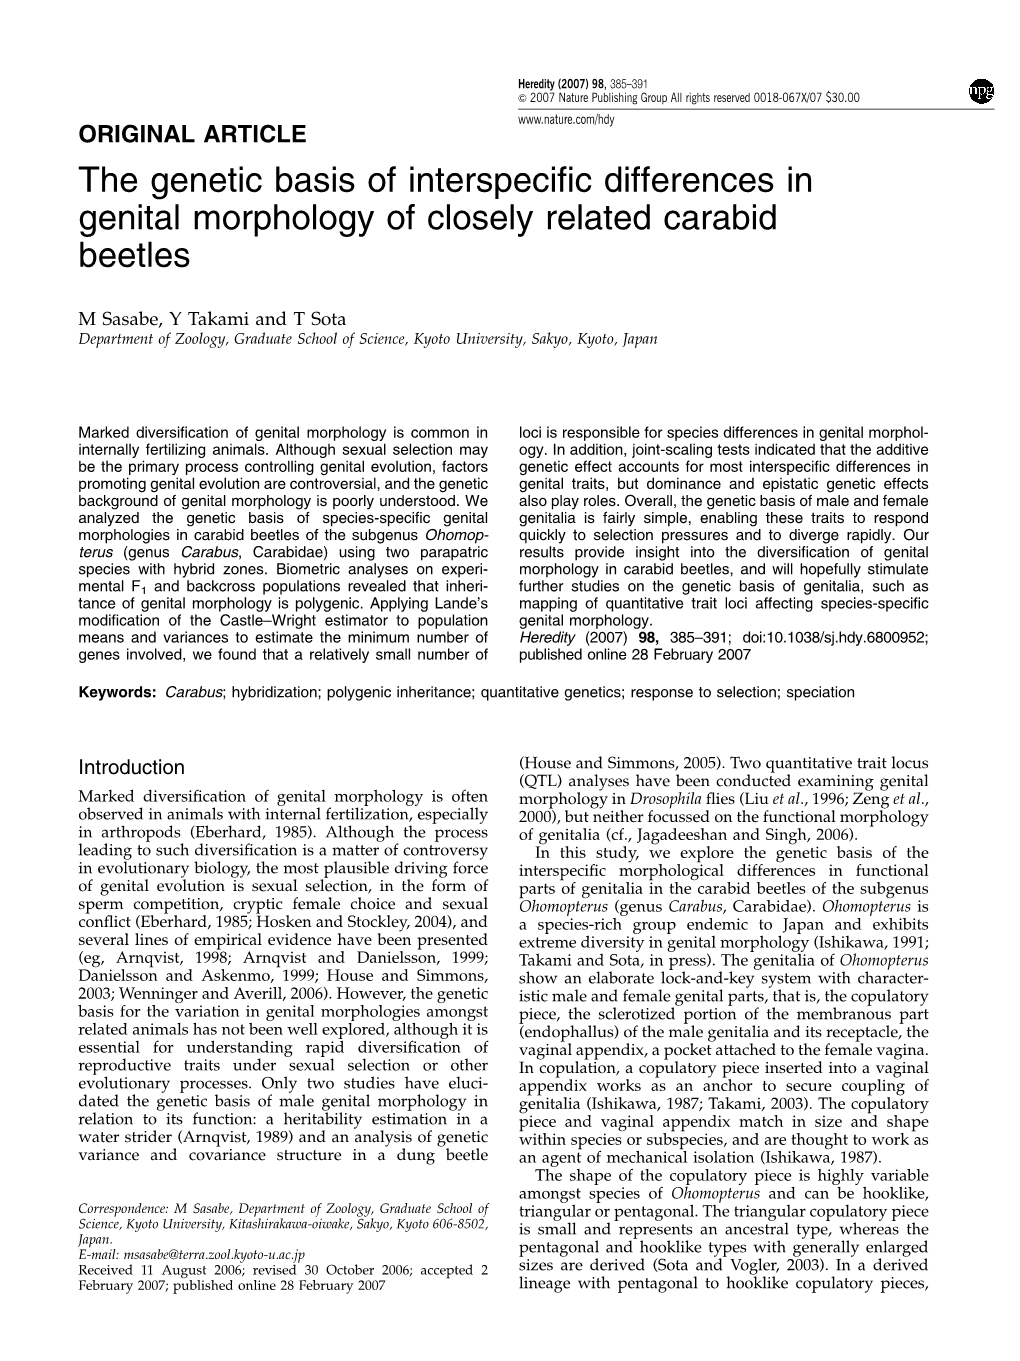 The Genetic Basis of Interspecific Differences in Genital Morphology Of